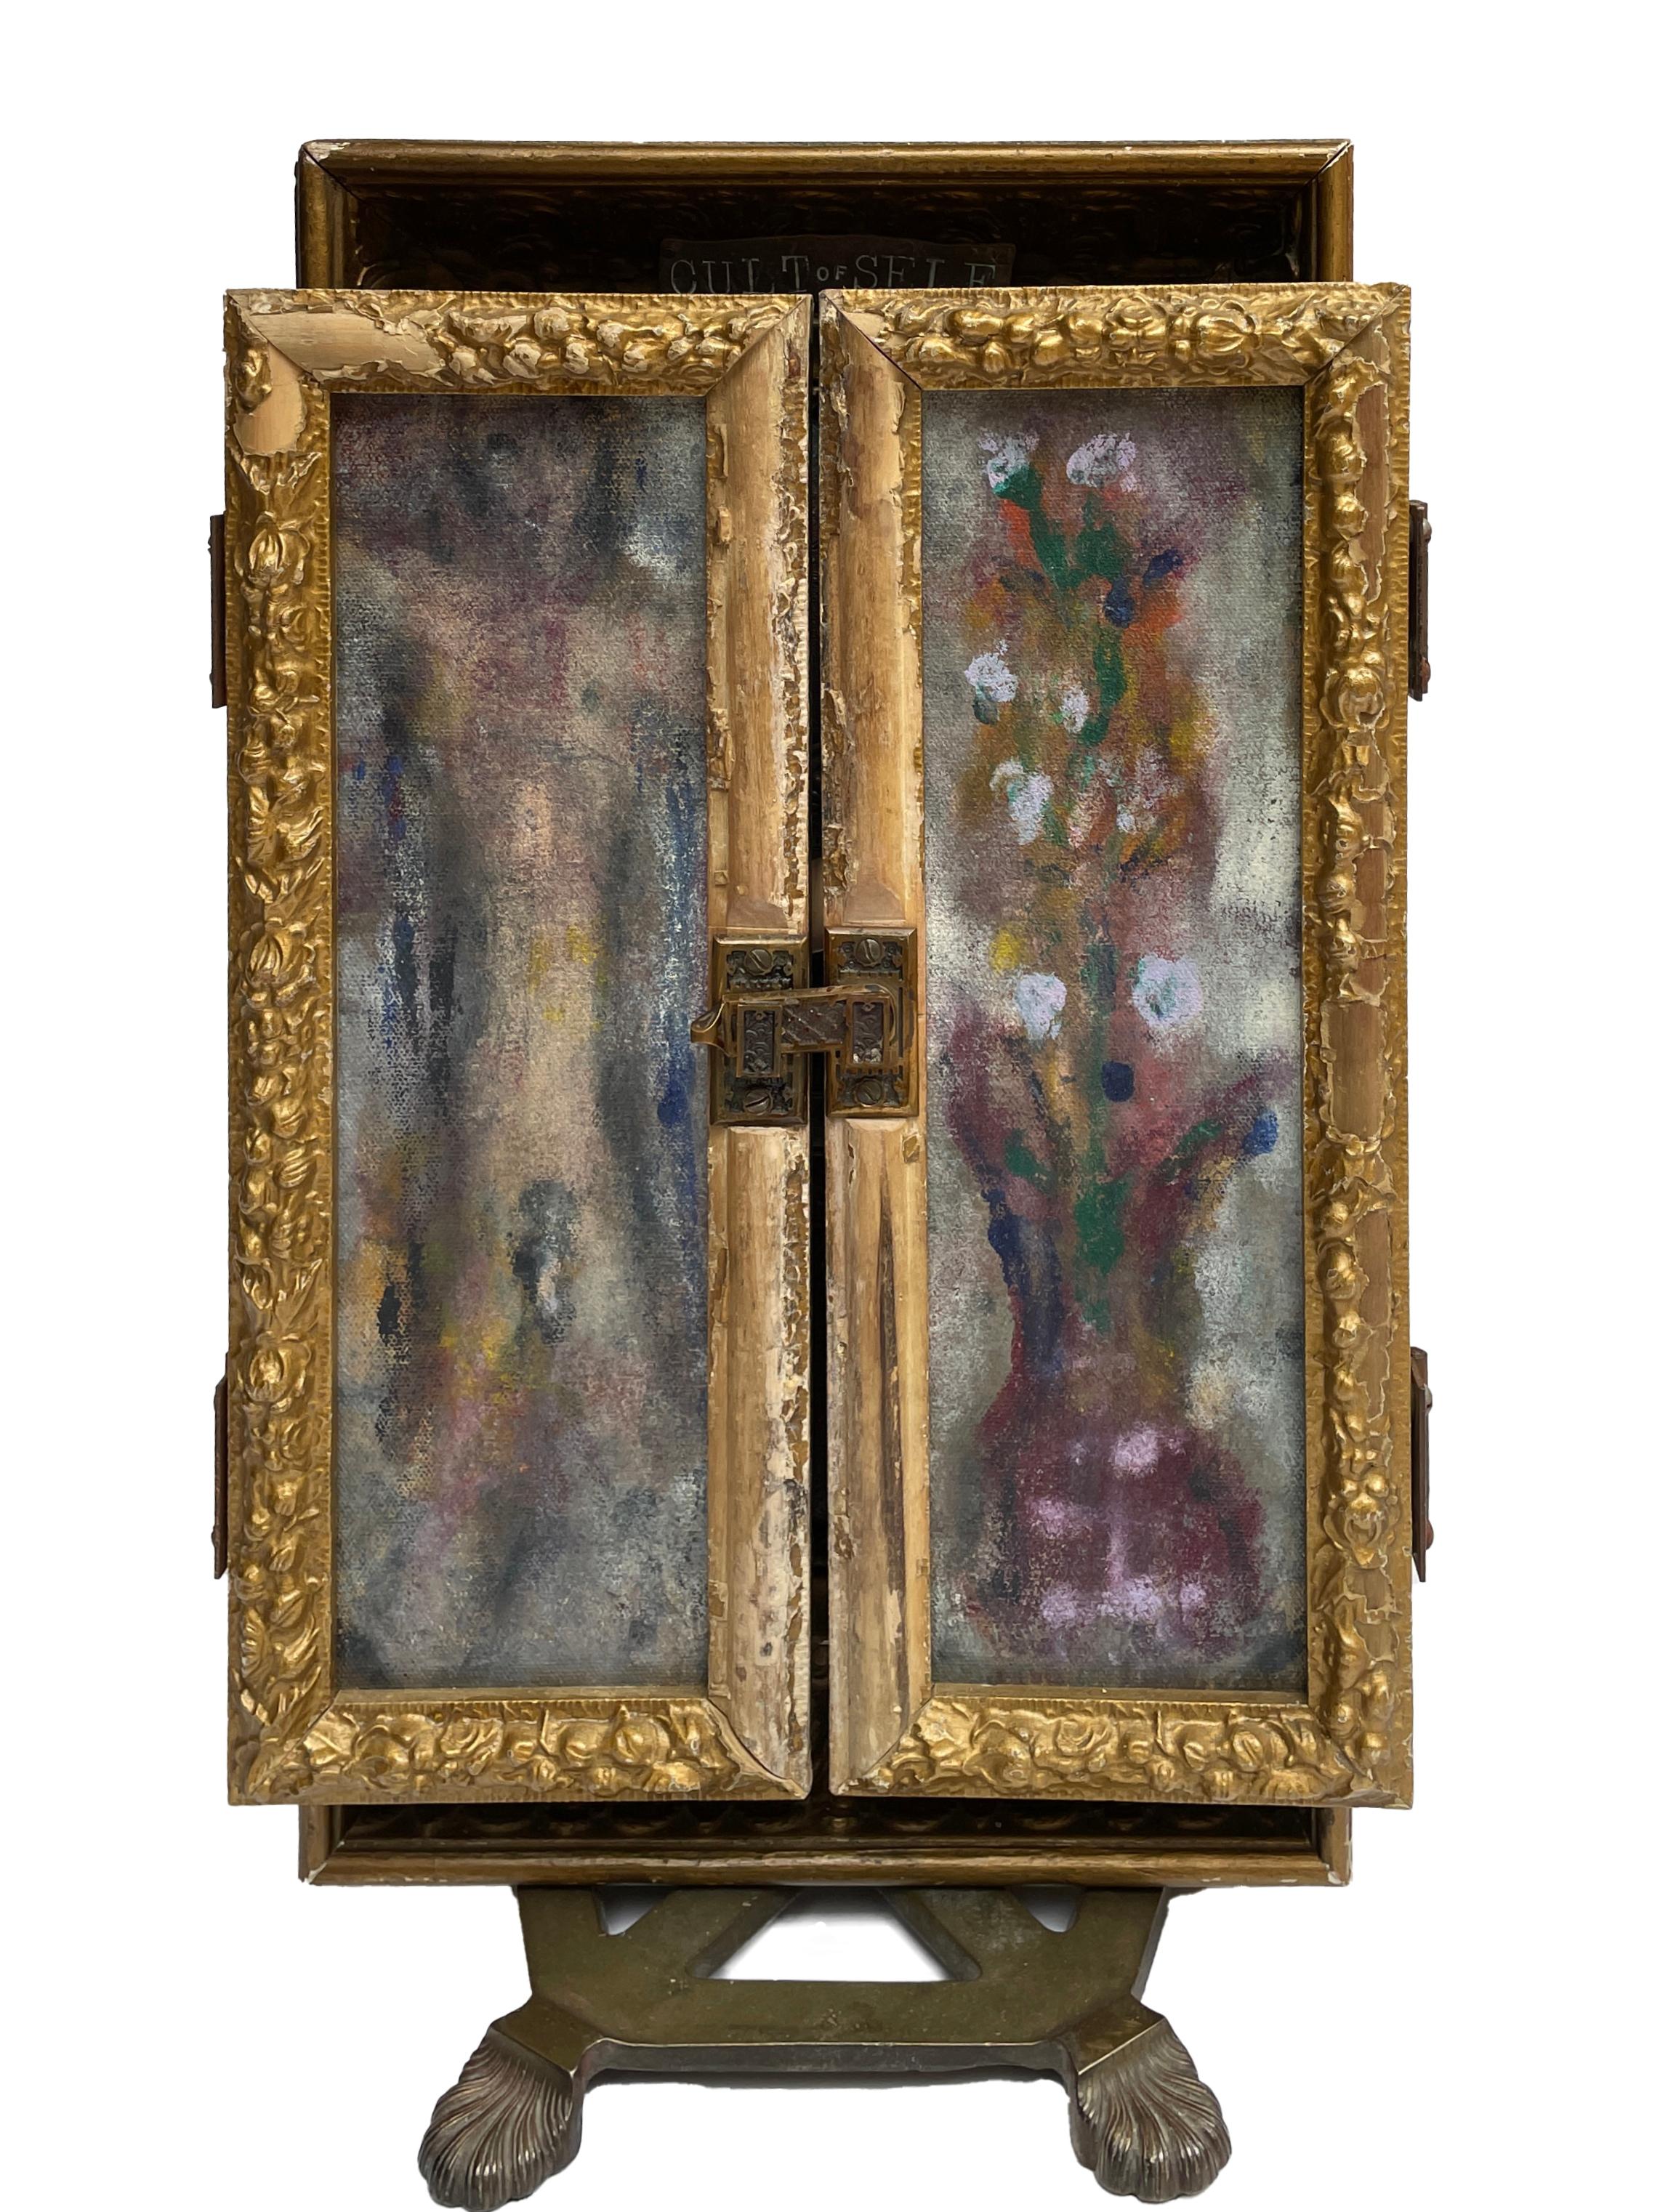 Self-taught artist John Seubert, AKA John Dolly, uses objects he uncovers as he rehabs older homes in Chicago. This piece has two handmade frames mounted side by side. Each side is a different treasure to discover. The front frames are two abstract